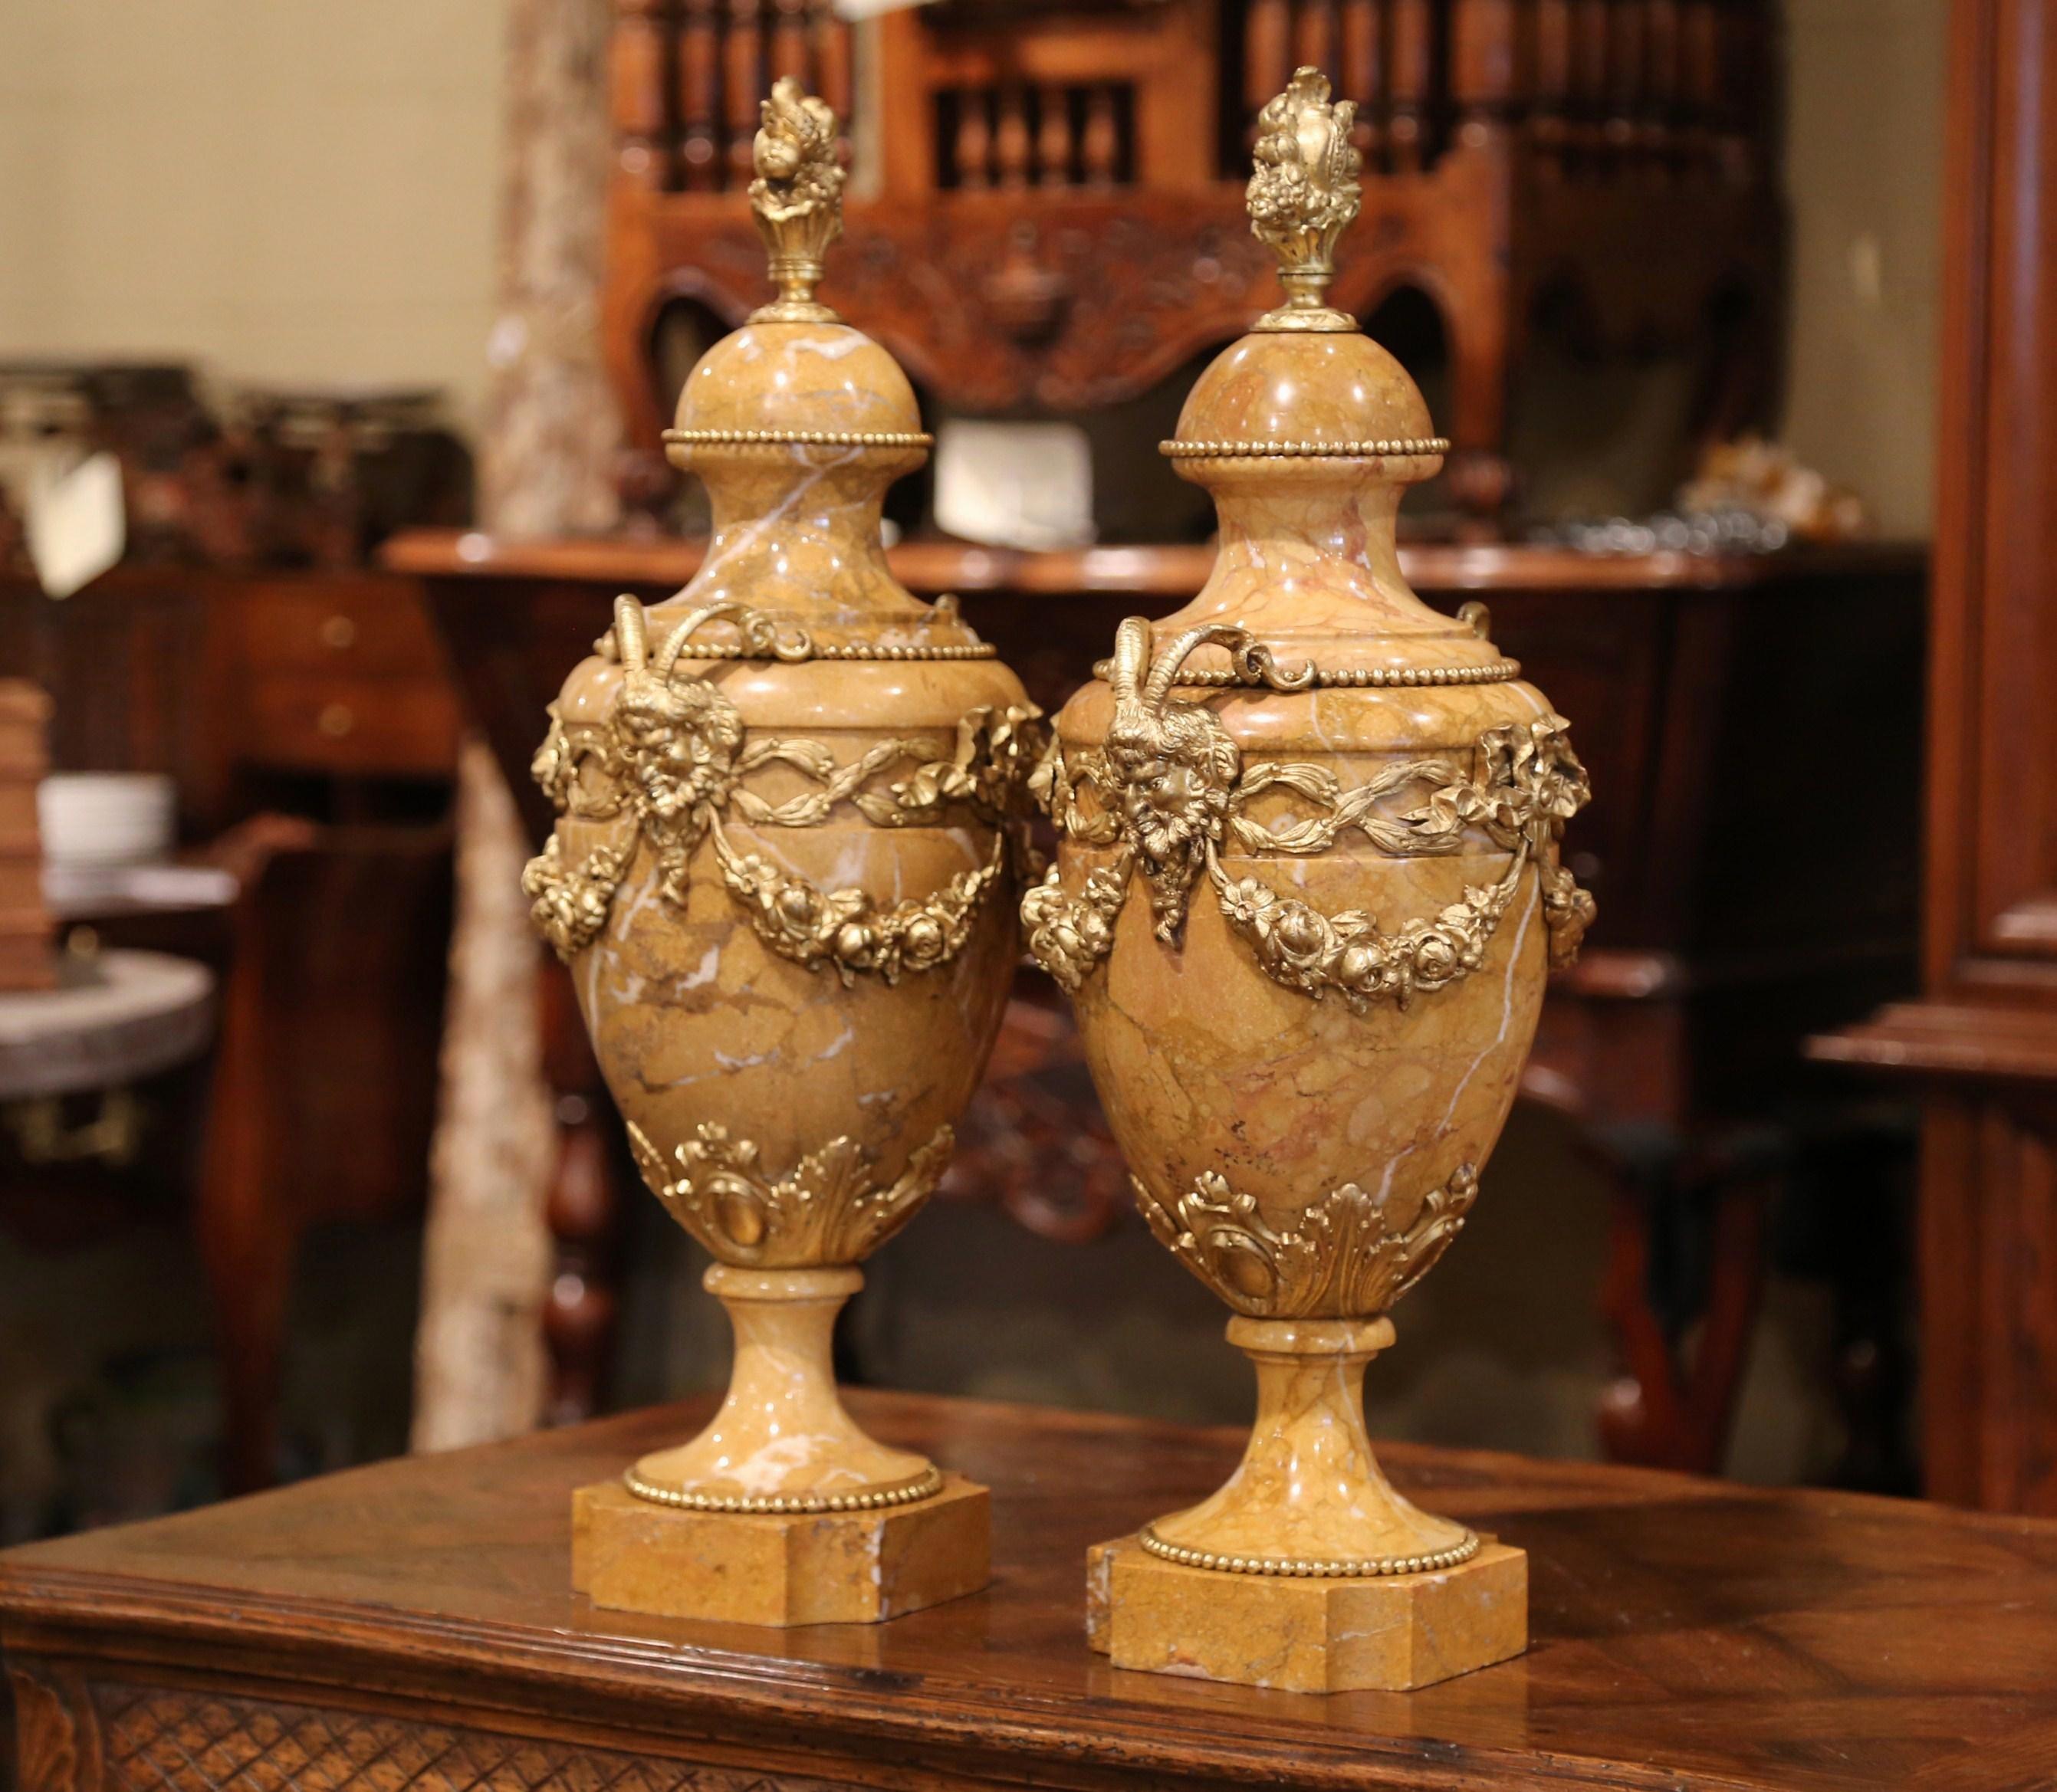 Crafted in France, circa 1870, this cassolette pair is hand carved from a beige marble stone and outfitted in bronze. The urns feature a decorative bronze finial at the top decorated with a fruit basket. The two side handles depict Bacchus (or